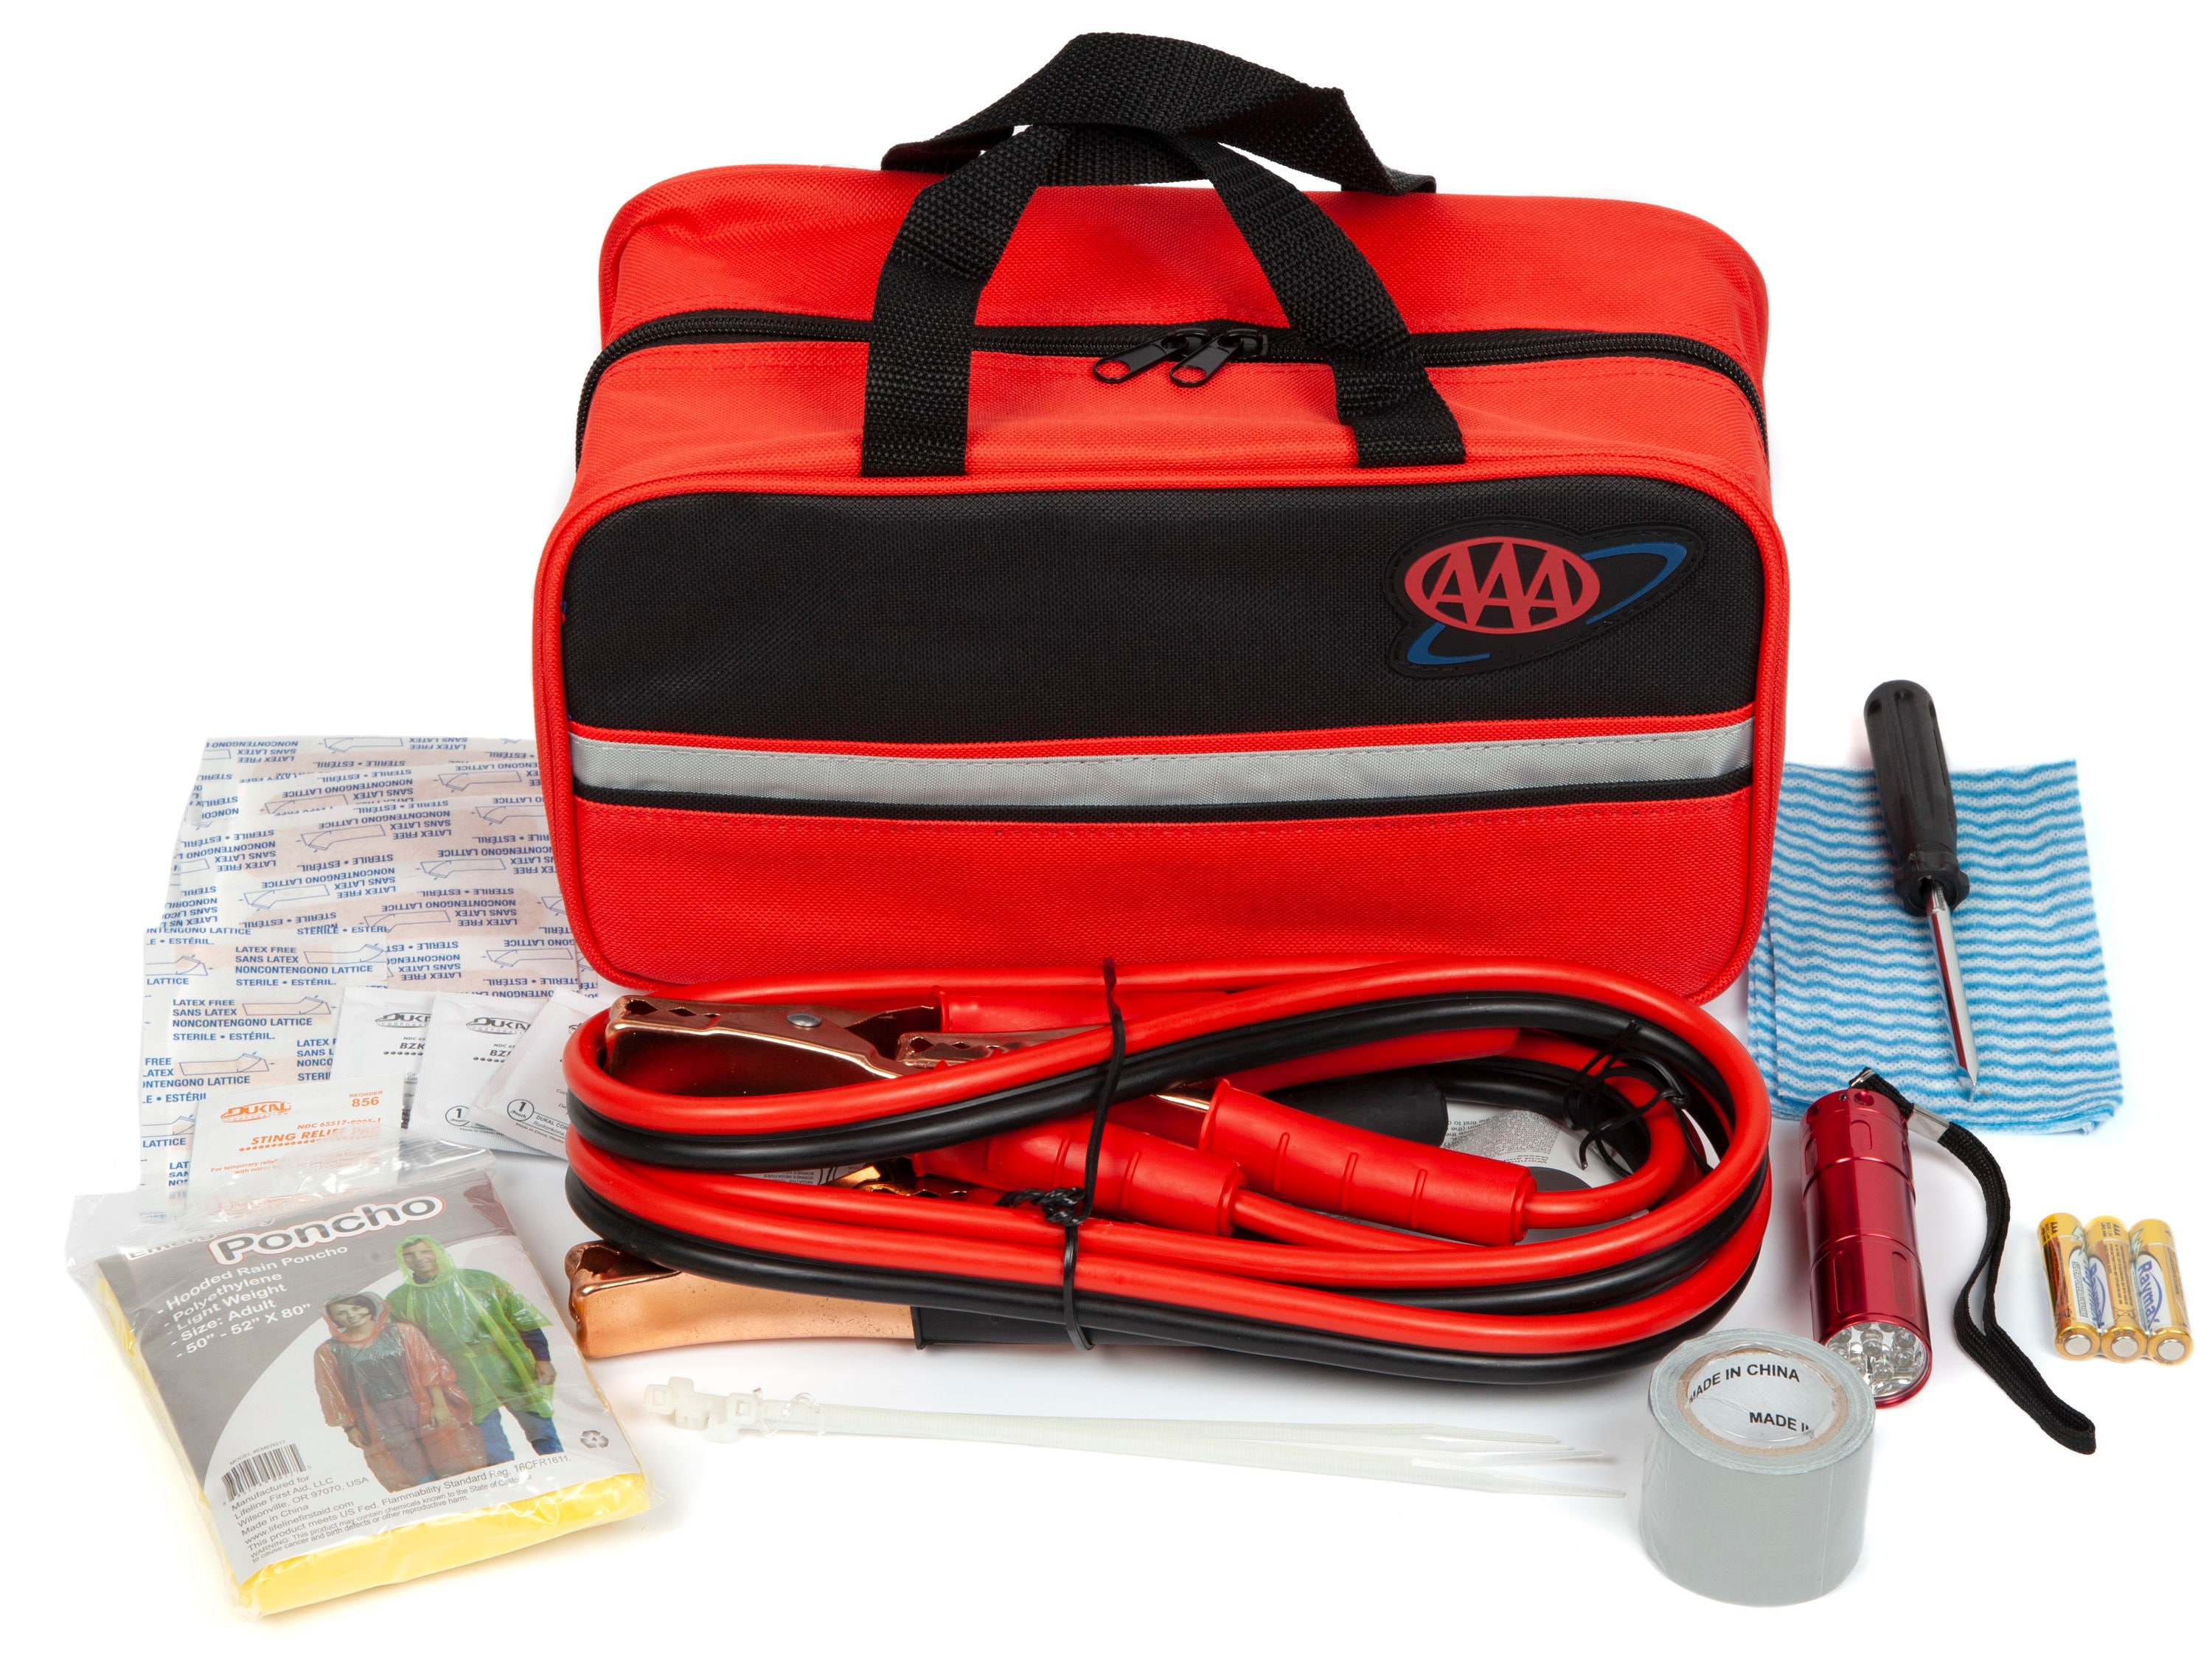 Thrive Roadside Emergency Car Kit - Car Safety Accessories and Tool Kit  with Jumper Cables and Mini First Aid Kit - Car Emergency Kit for Women and